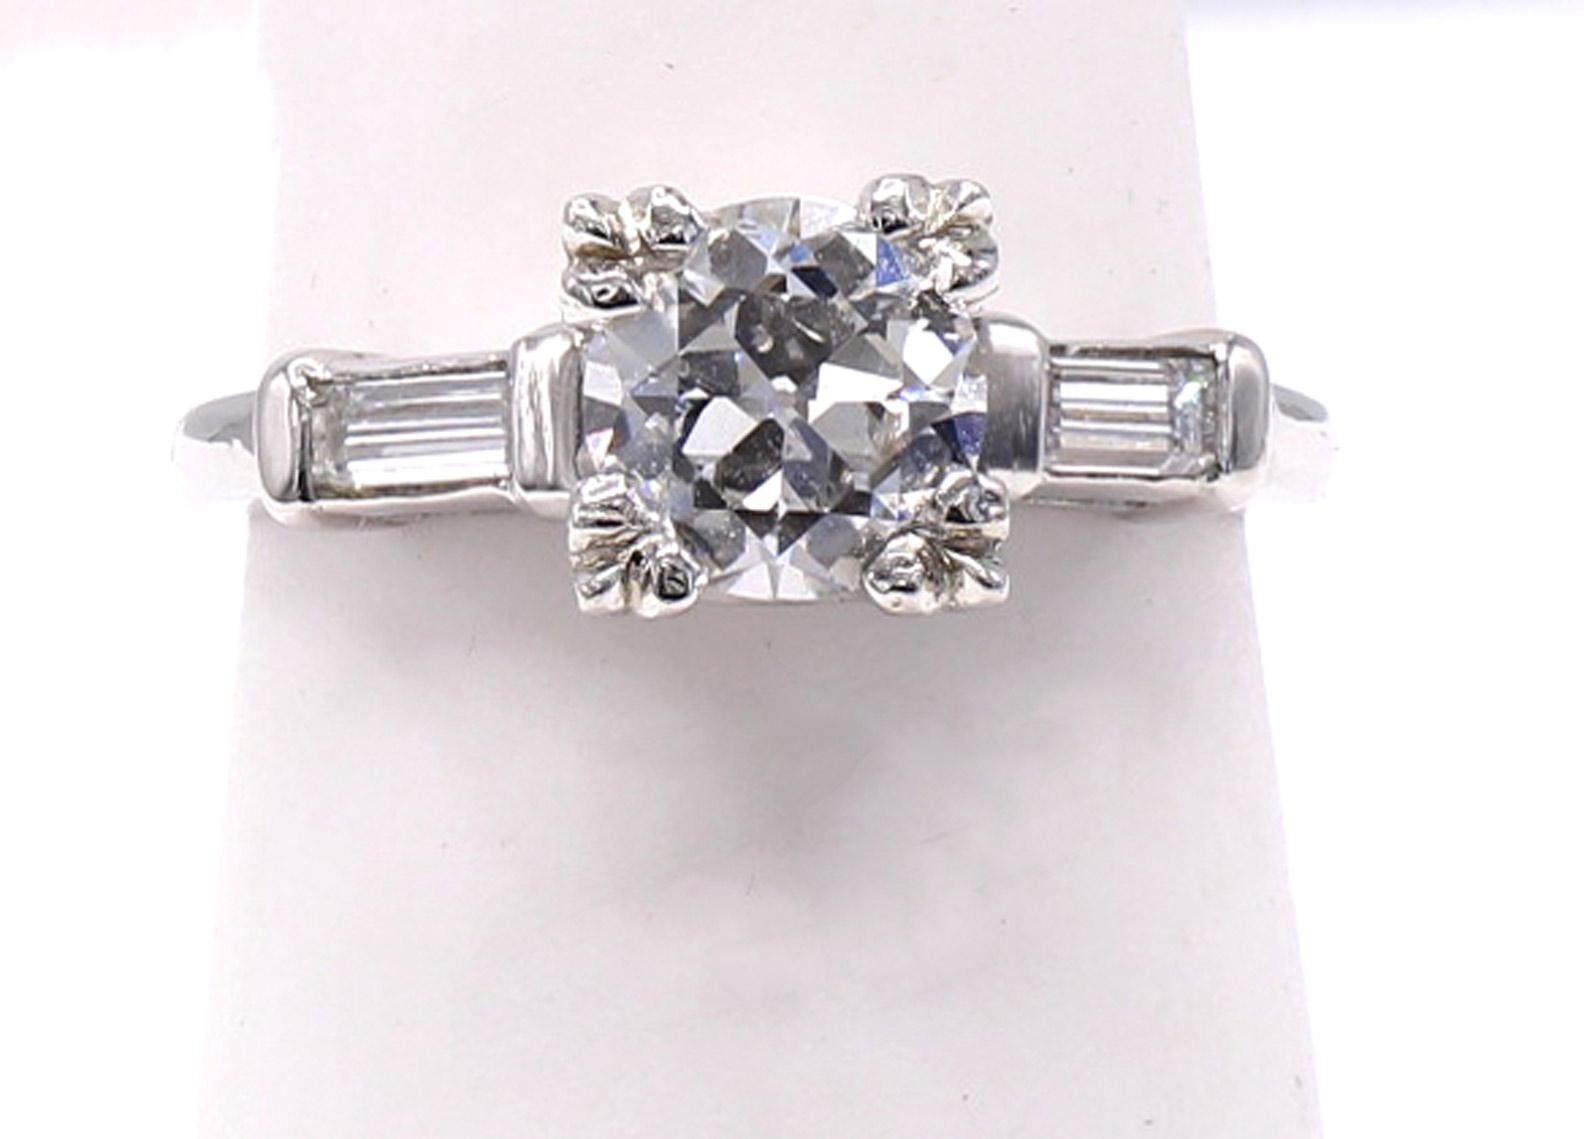  Old European Cut 0.91 Carat GIA Certified Diamond Platinum Engagement Ring In Good Condition For Sale In New York, NY